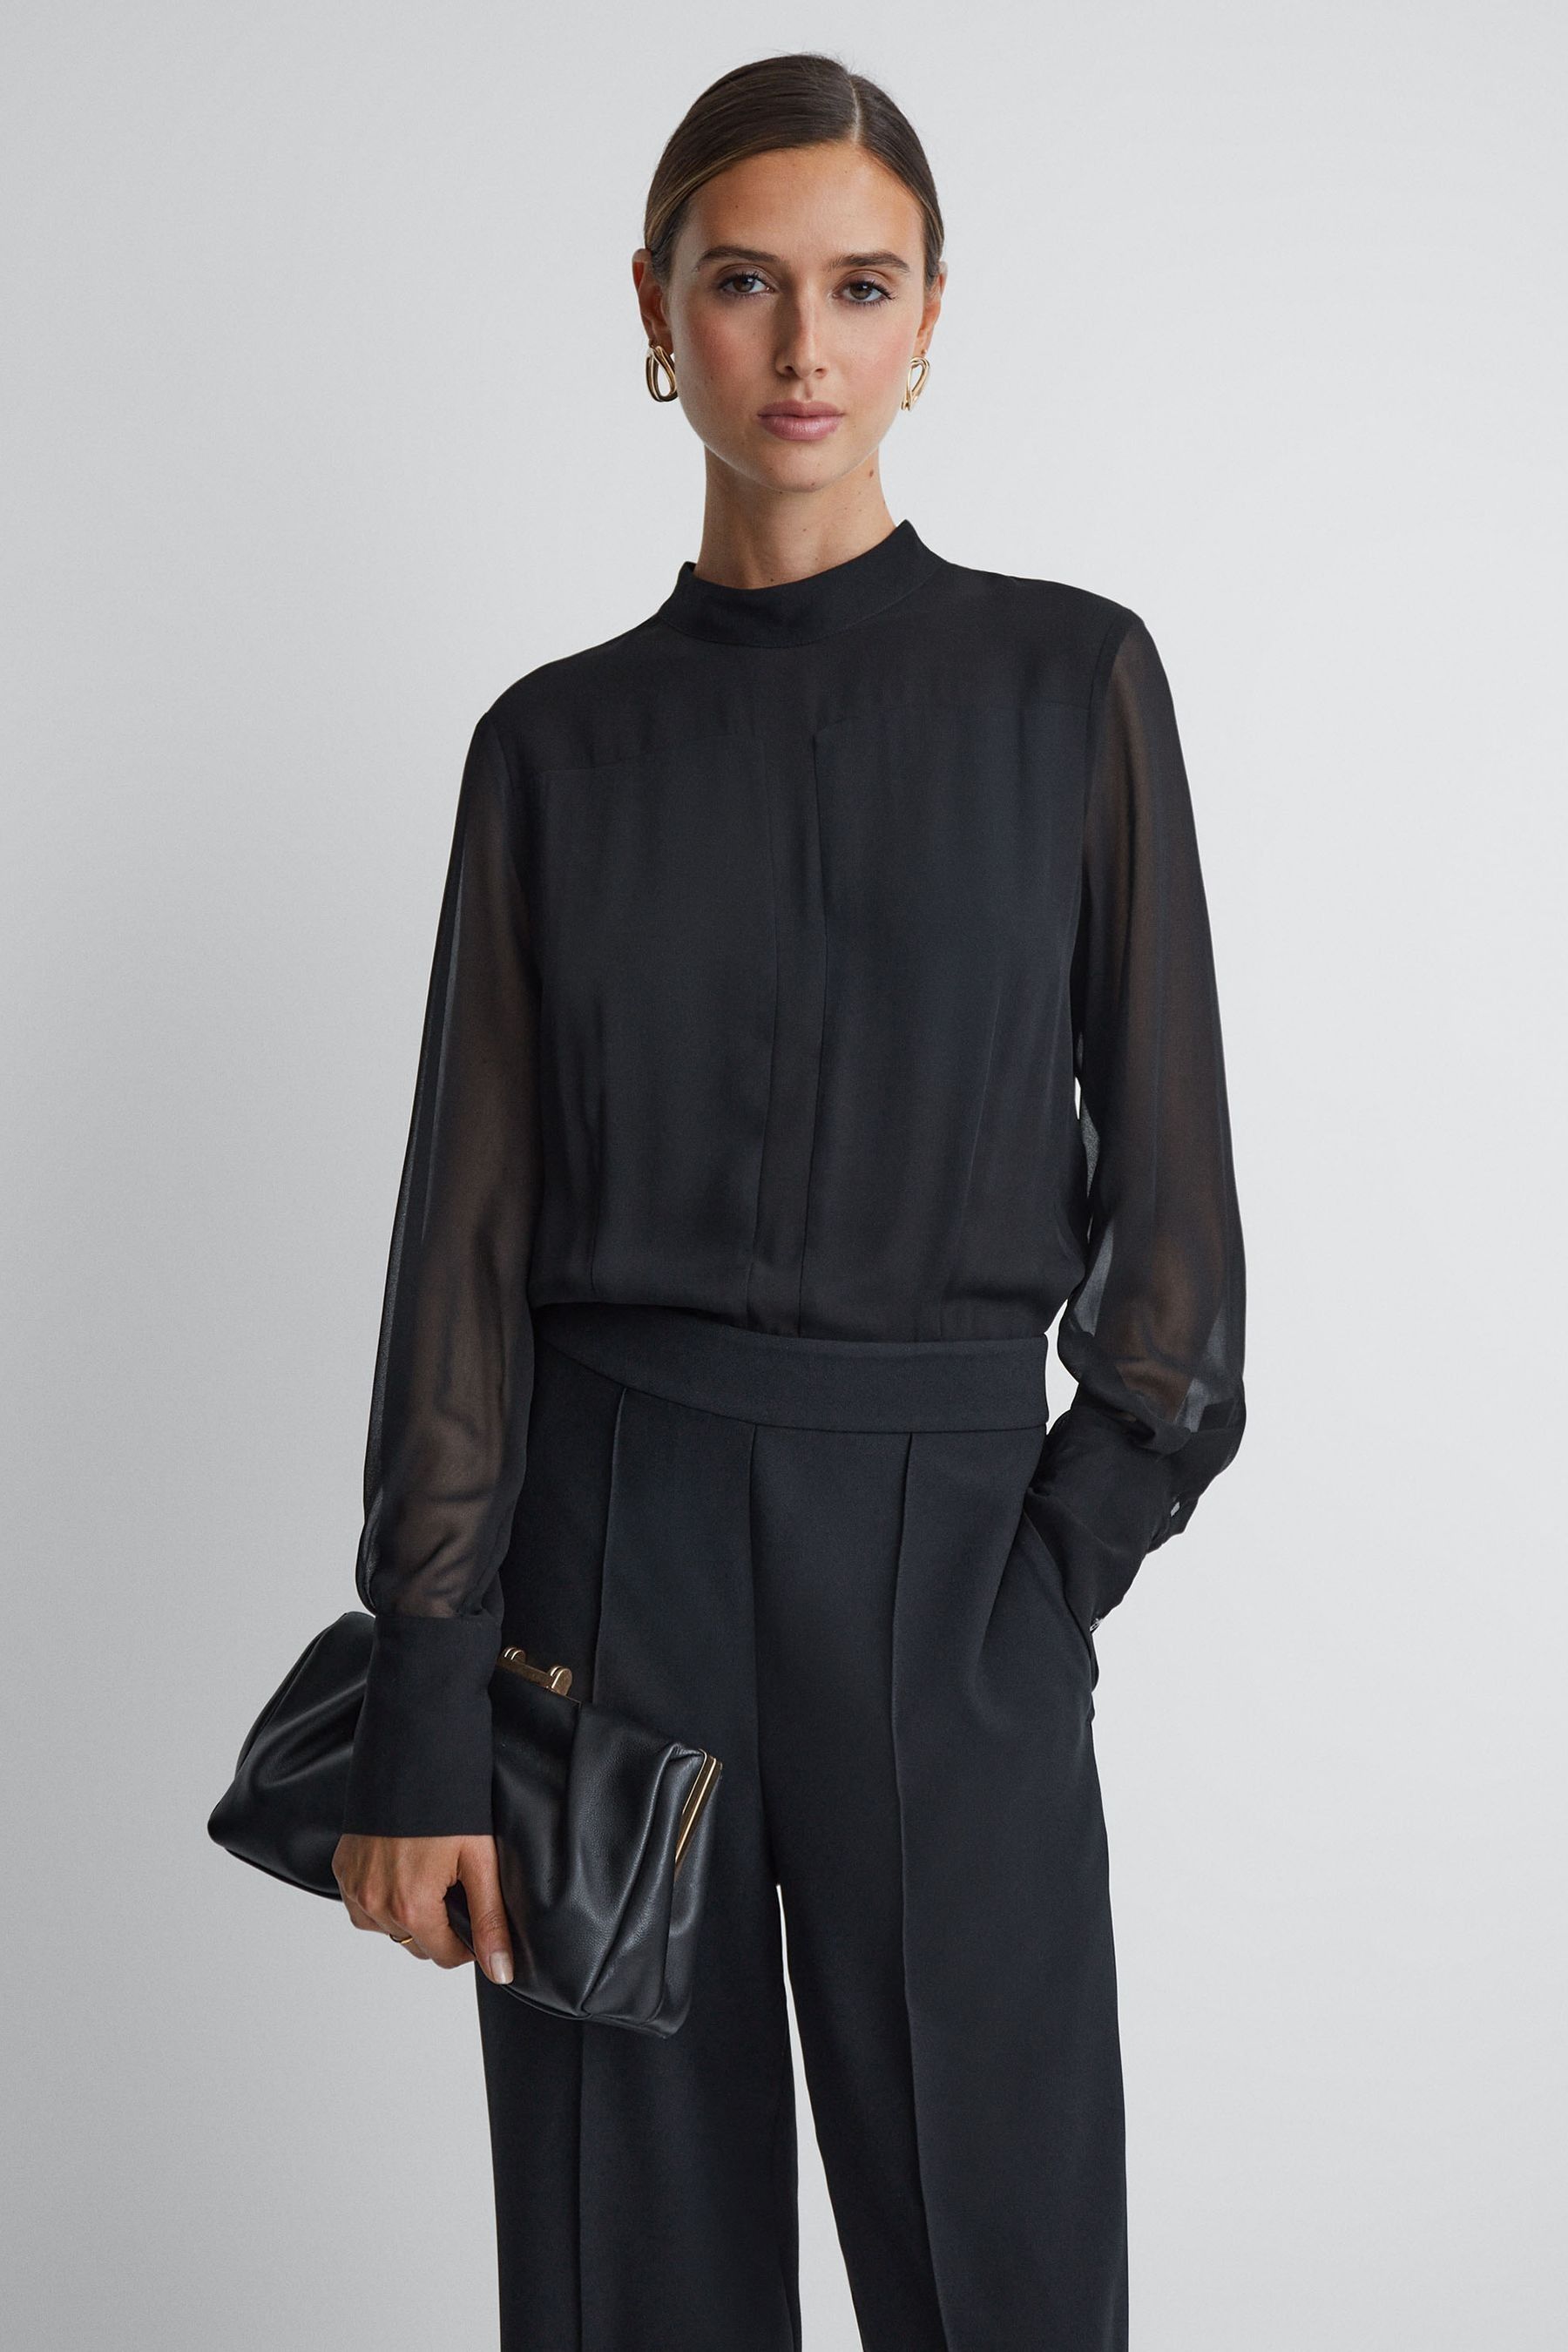 Magda - Black Sheer Fitted...